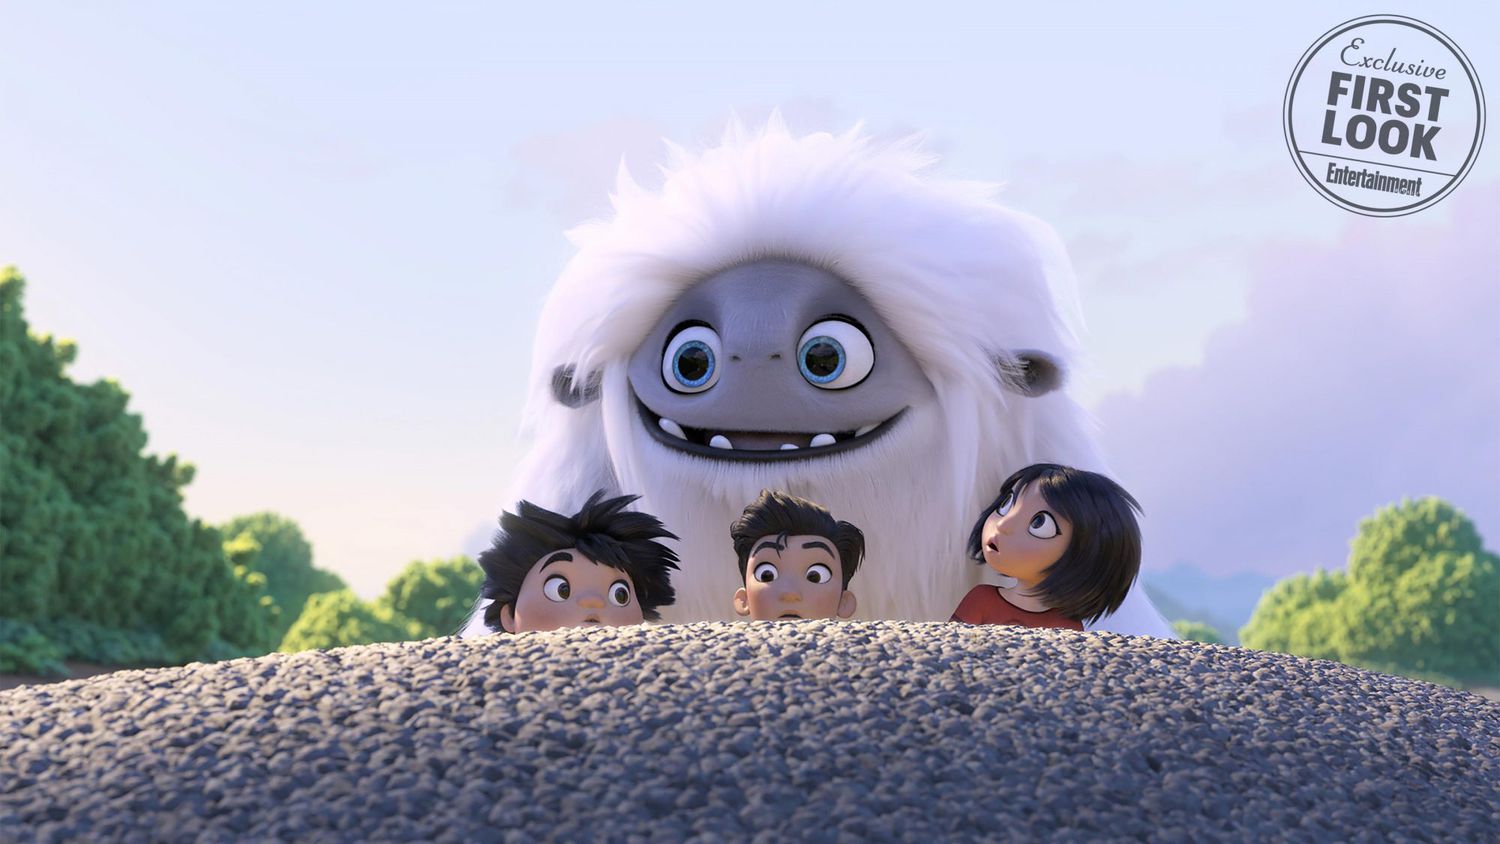 Abominable first look: Meet the fuzzy yeti hero of new DreamWorks film |  